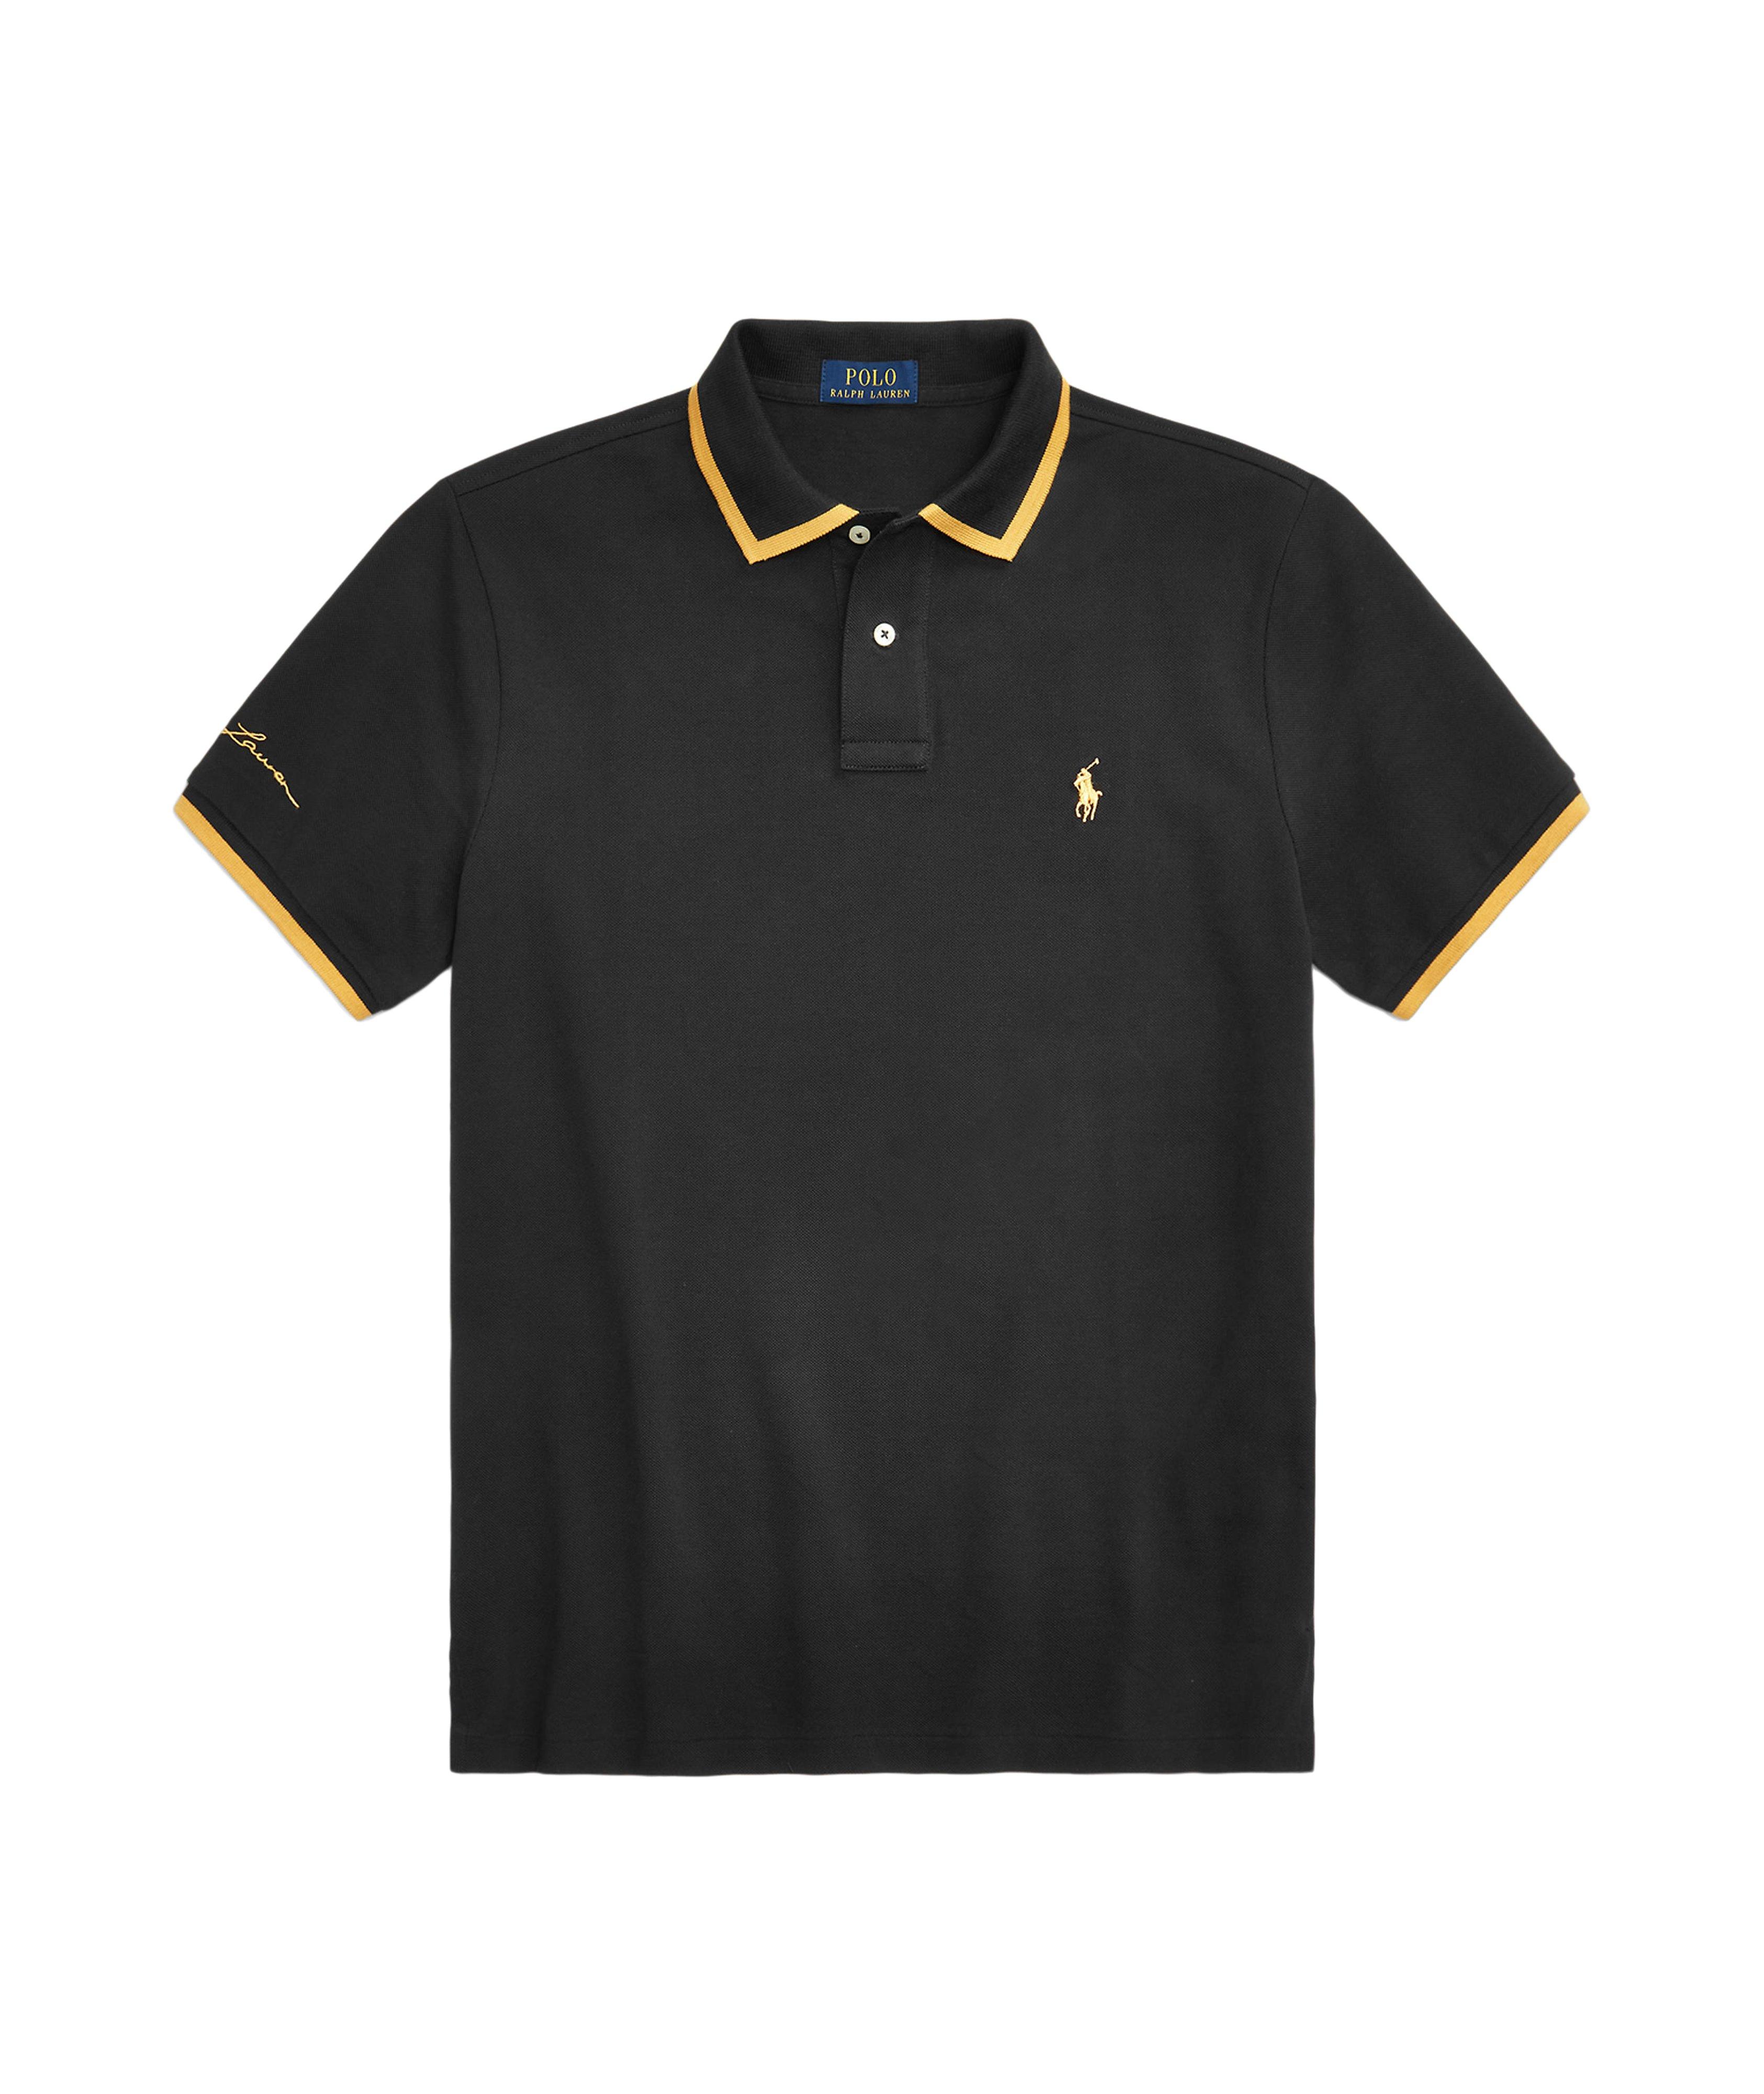 Slim Fit Lunar New Year Polo  image 0